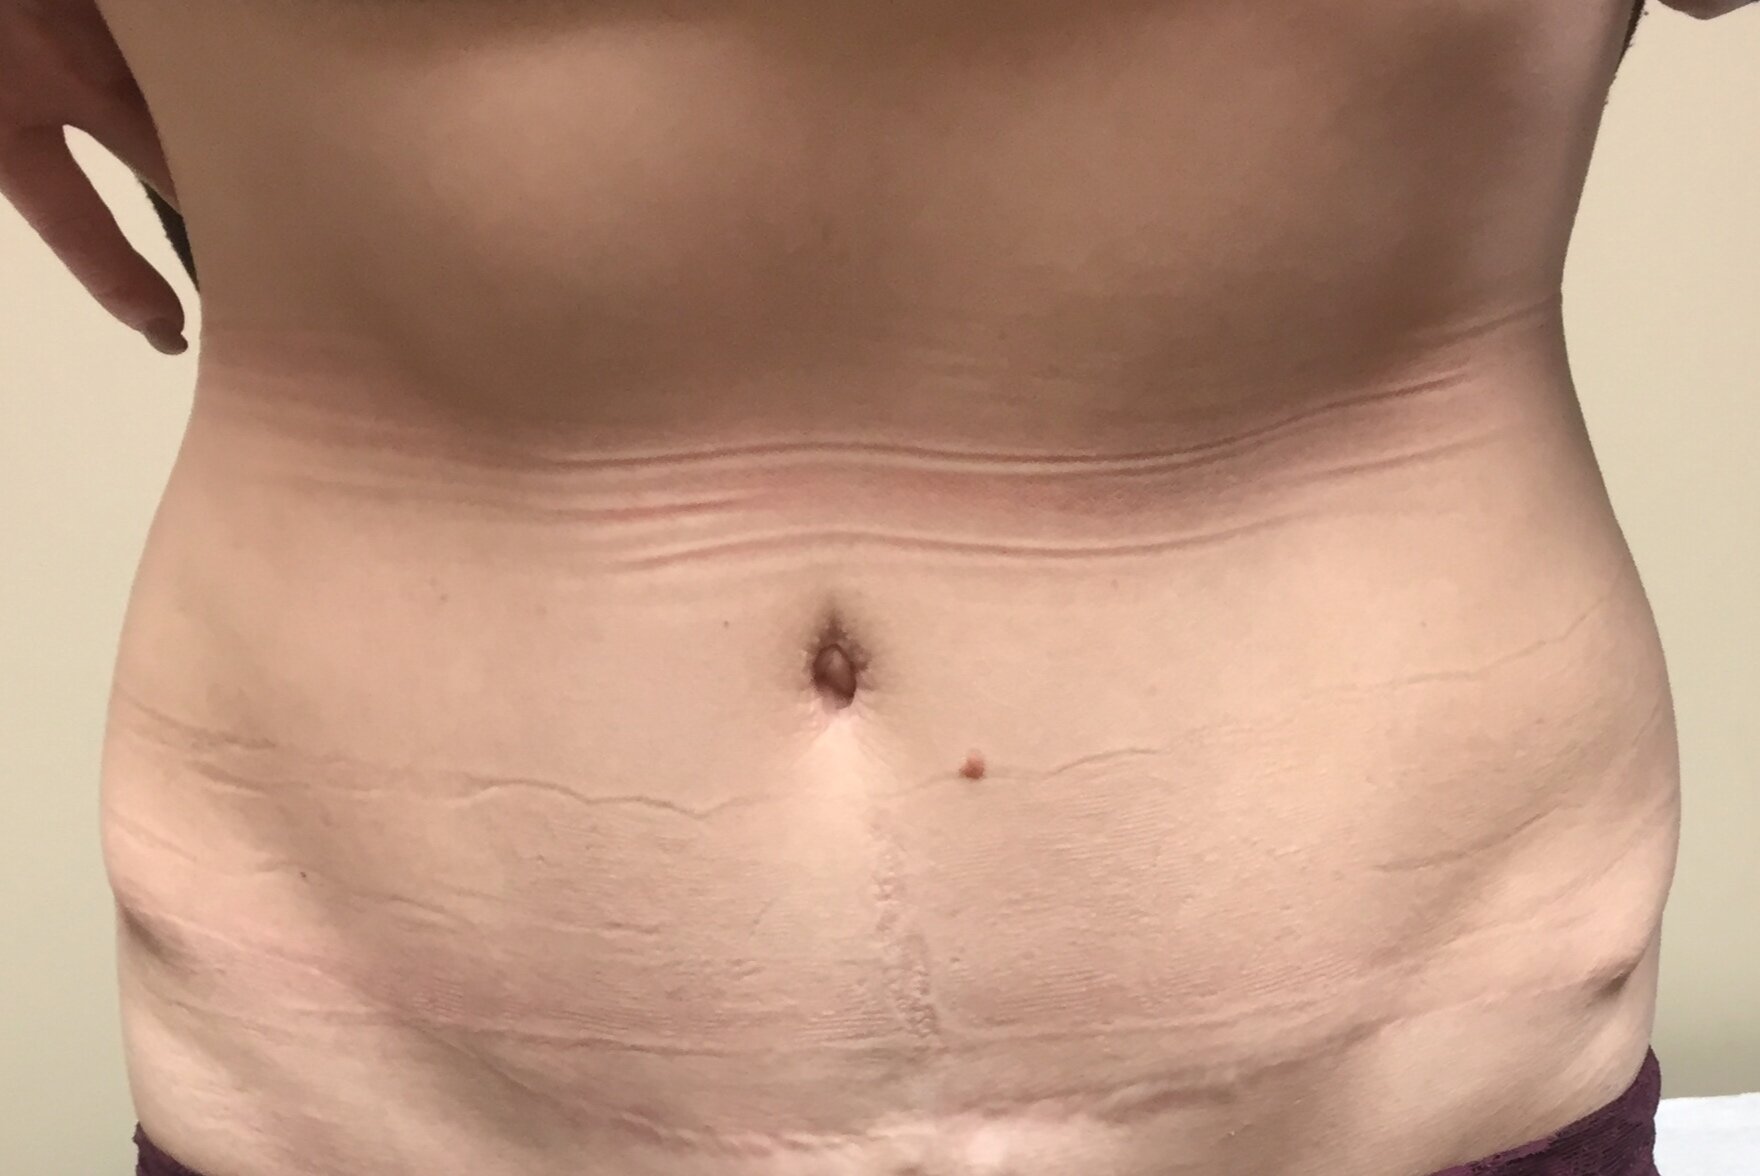 Patient I - 10 Years Post-Operative Tummy Tuck — Dr Giuffre